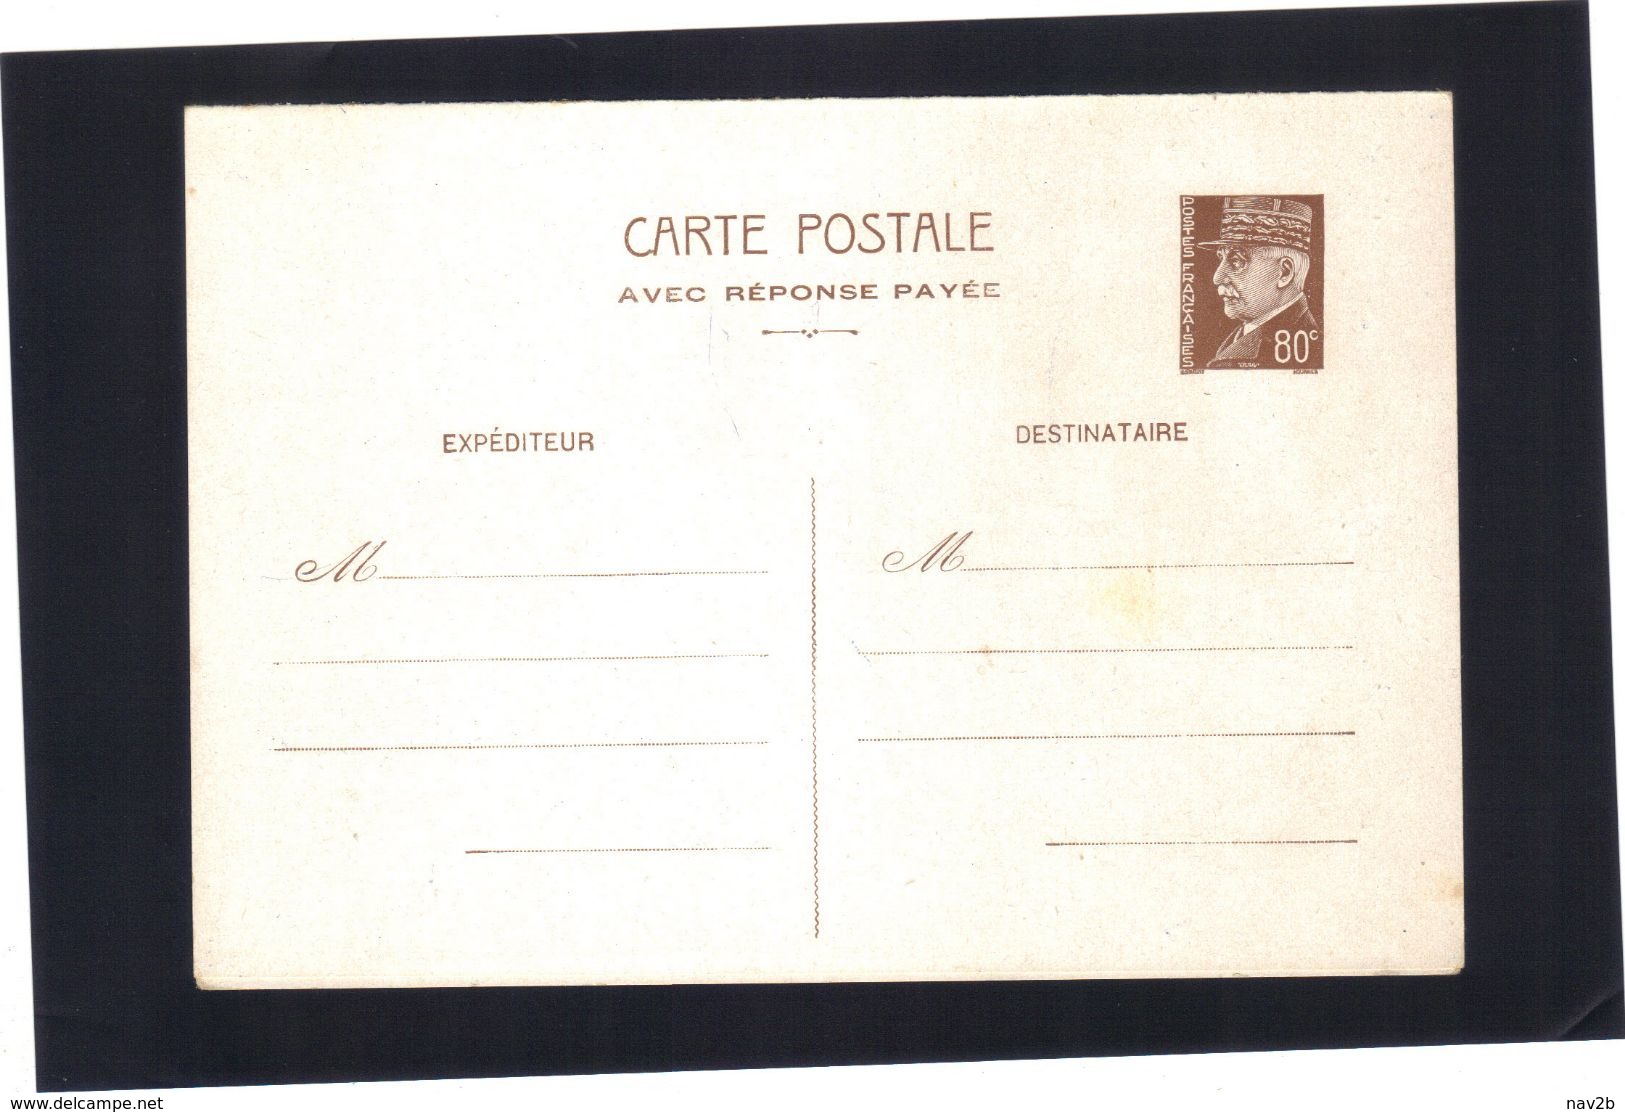 Entier Carte Postale Pétain 80 Cts .  REPONSE  PAYEE .  Neuve . - Standard Postcards & Stamped On Demand (before 1995)